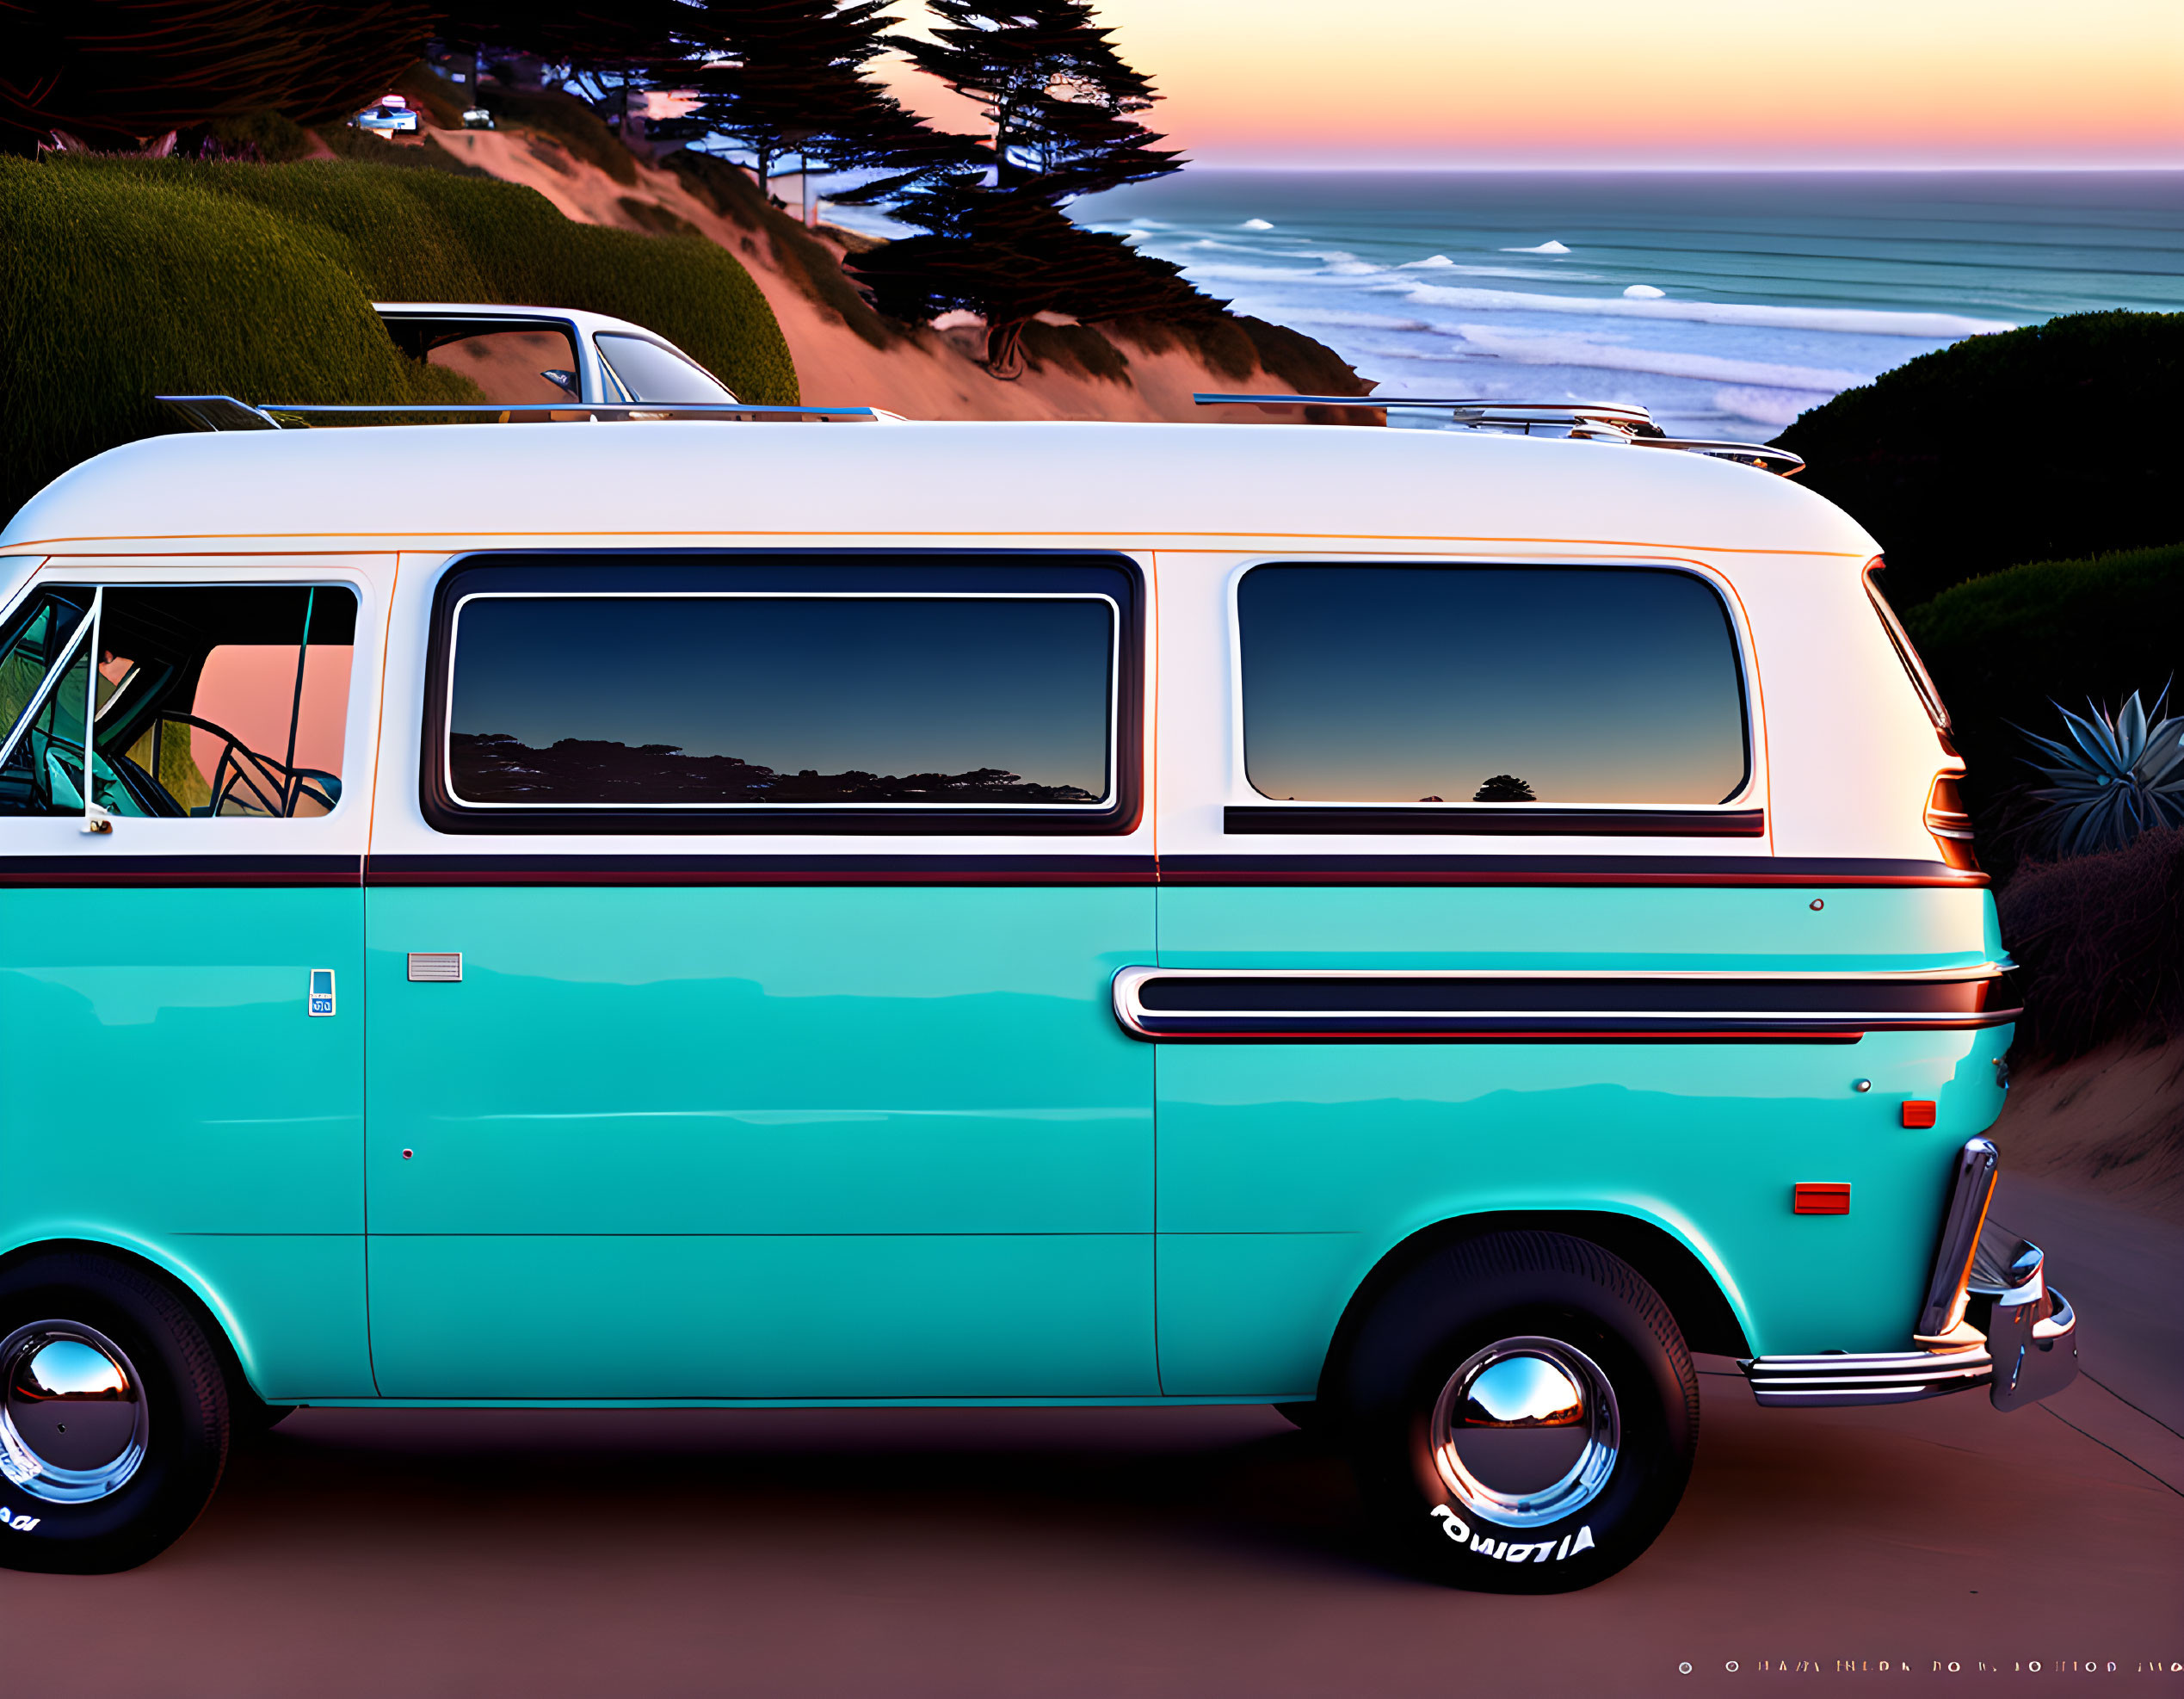 Vintage Turquoise and White Van by Beachside Road at Sunset